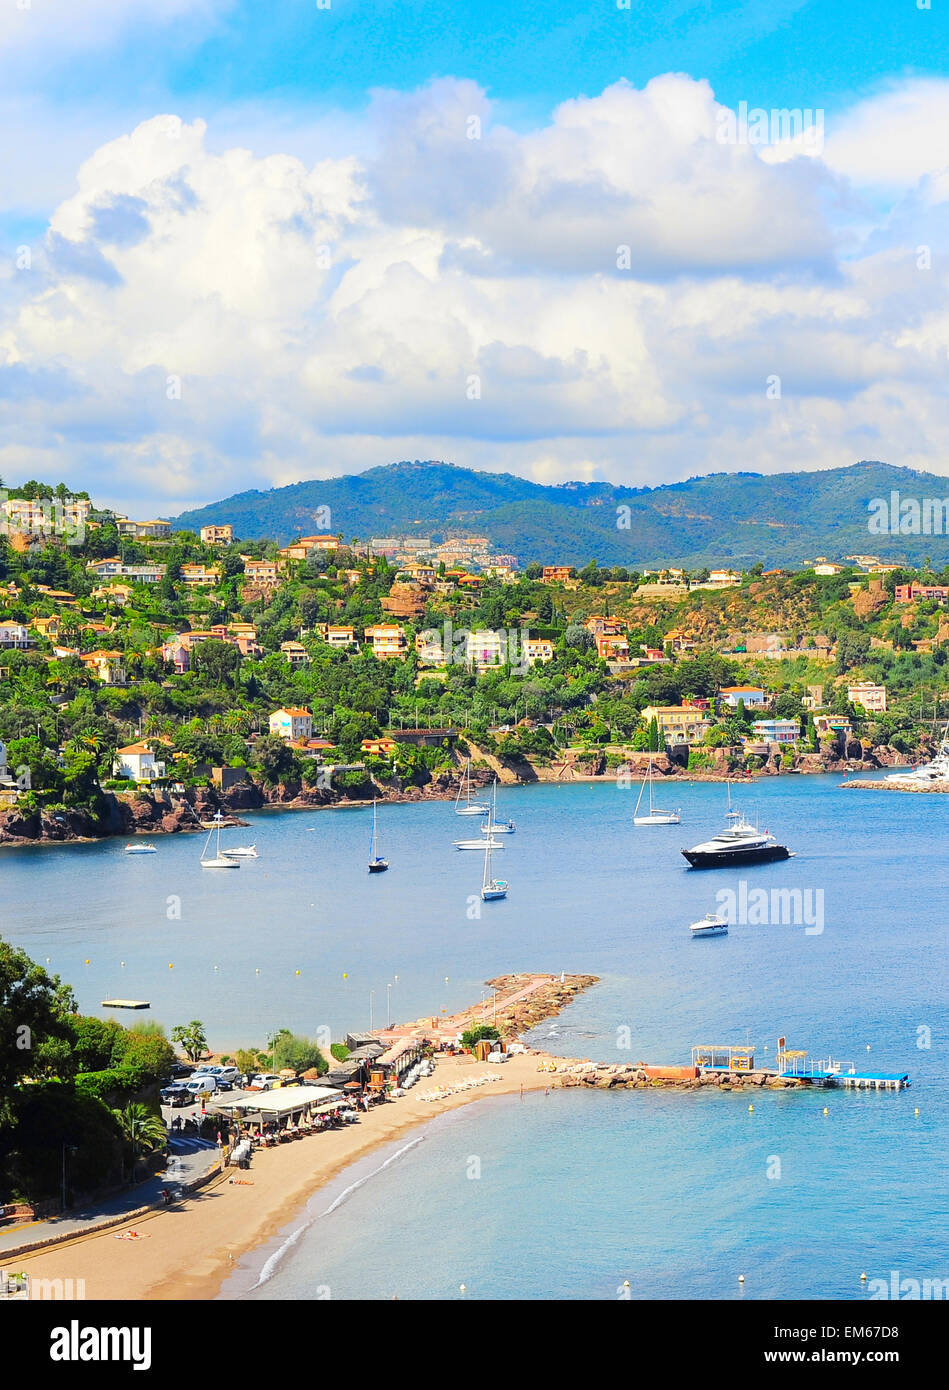 Luxury beach, yachts and boats. French Riviera, Azure Coast or Cote d Azur, Provence, France Stock Photo